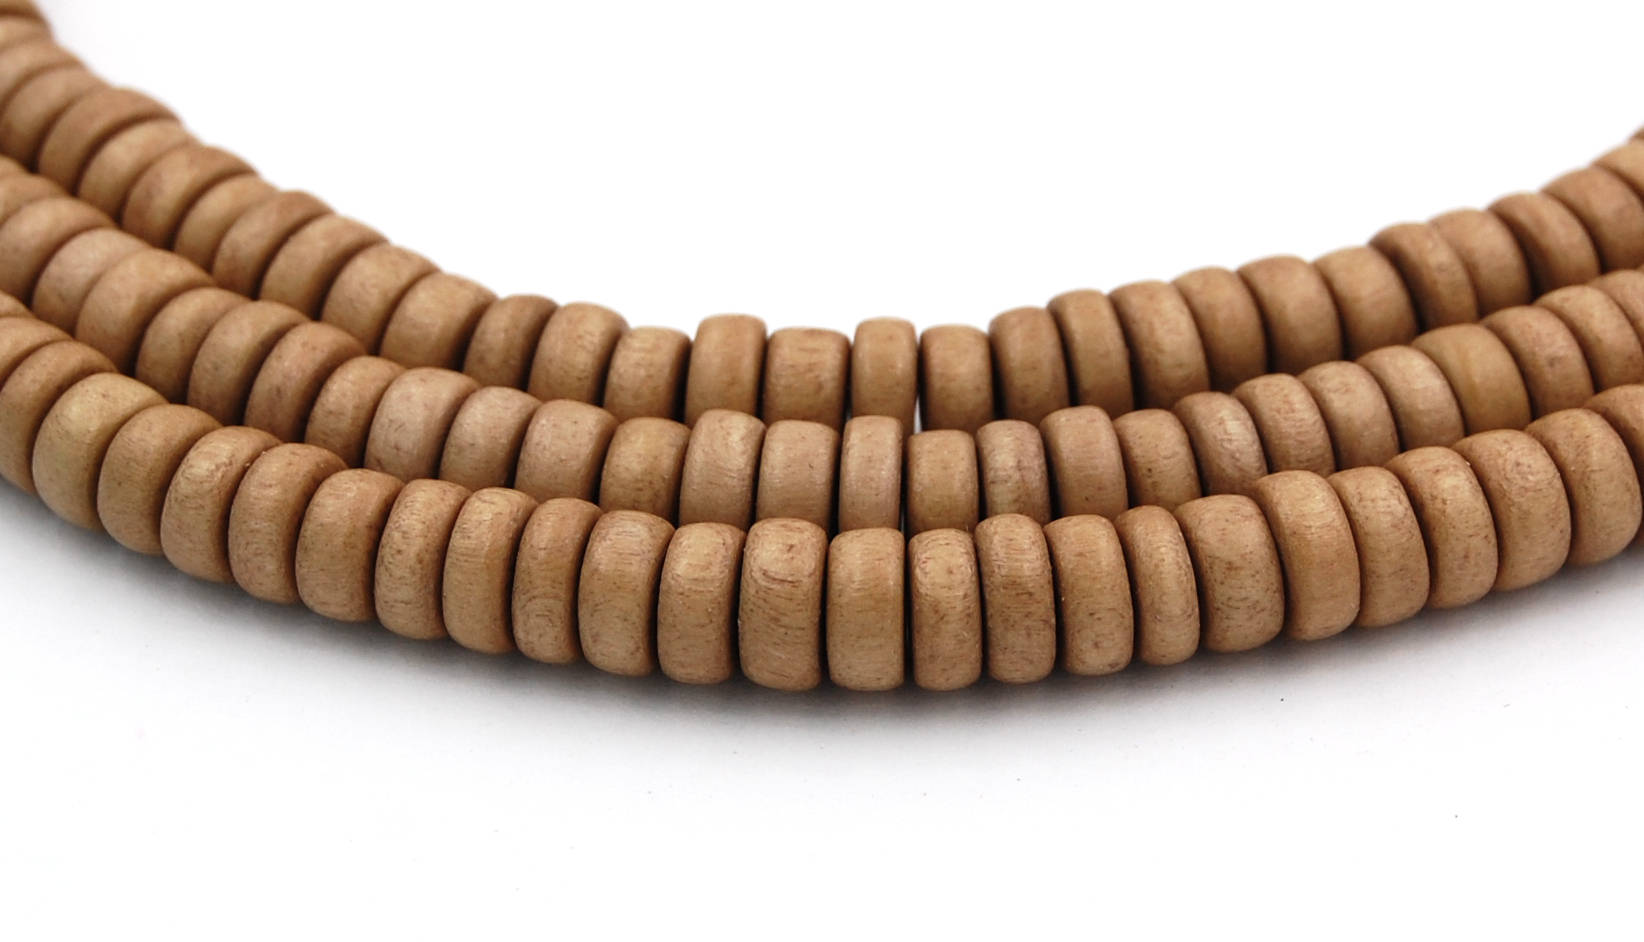 Toasted Almond Brown Wood Rondelle 8x4mm, Light brown Rondelle Boho Wood Beads -16 inch strand